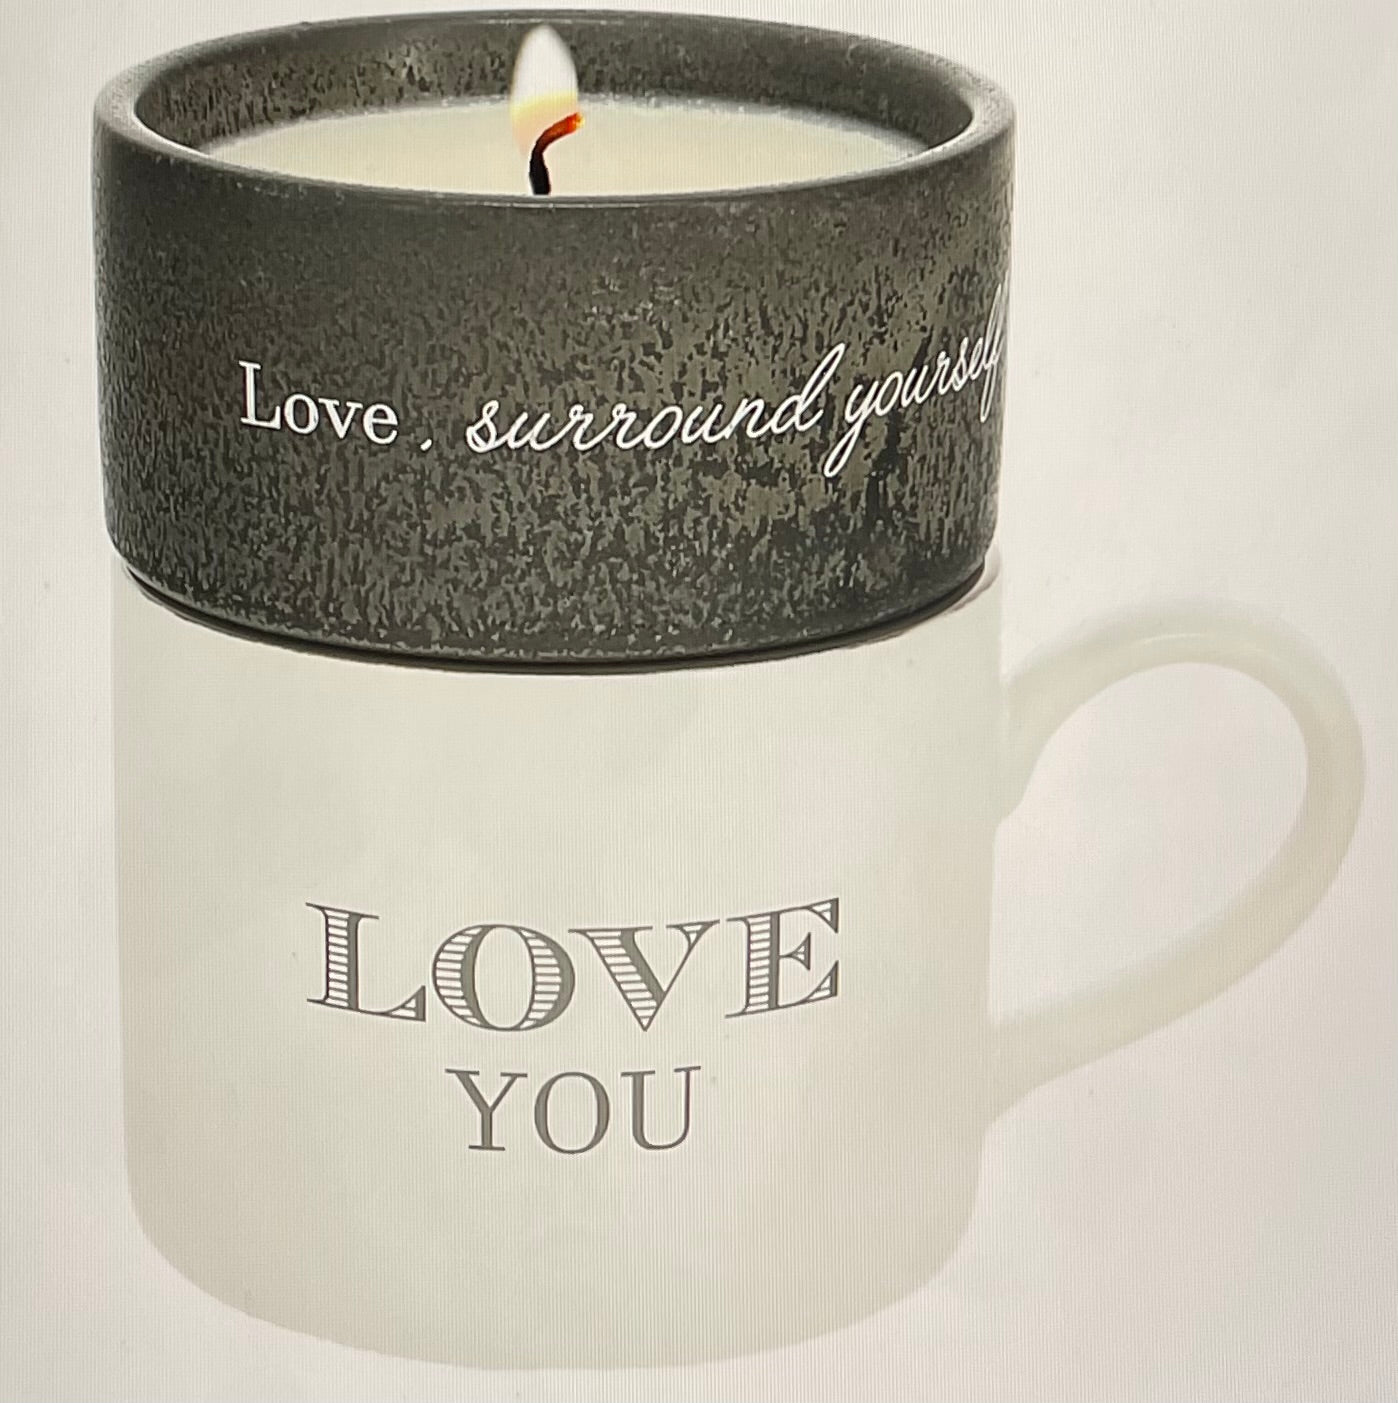 Love - Stacking Mug and Candle Set 100% Soy Wax Scent: Tranquility